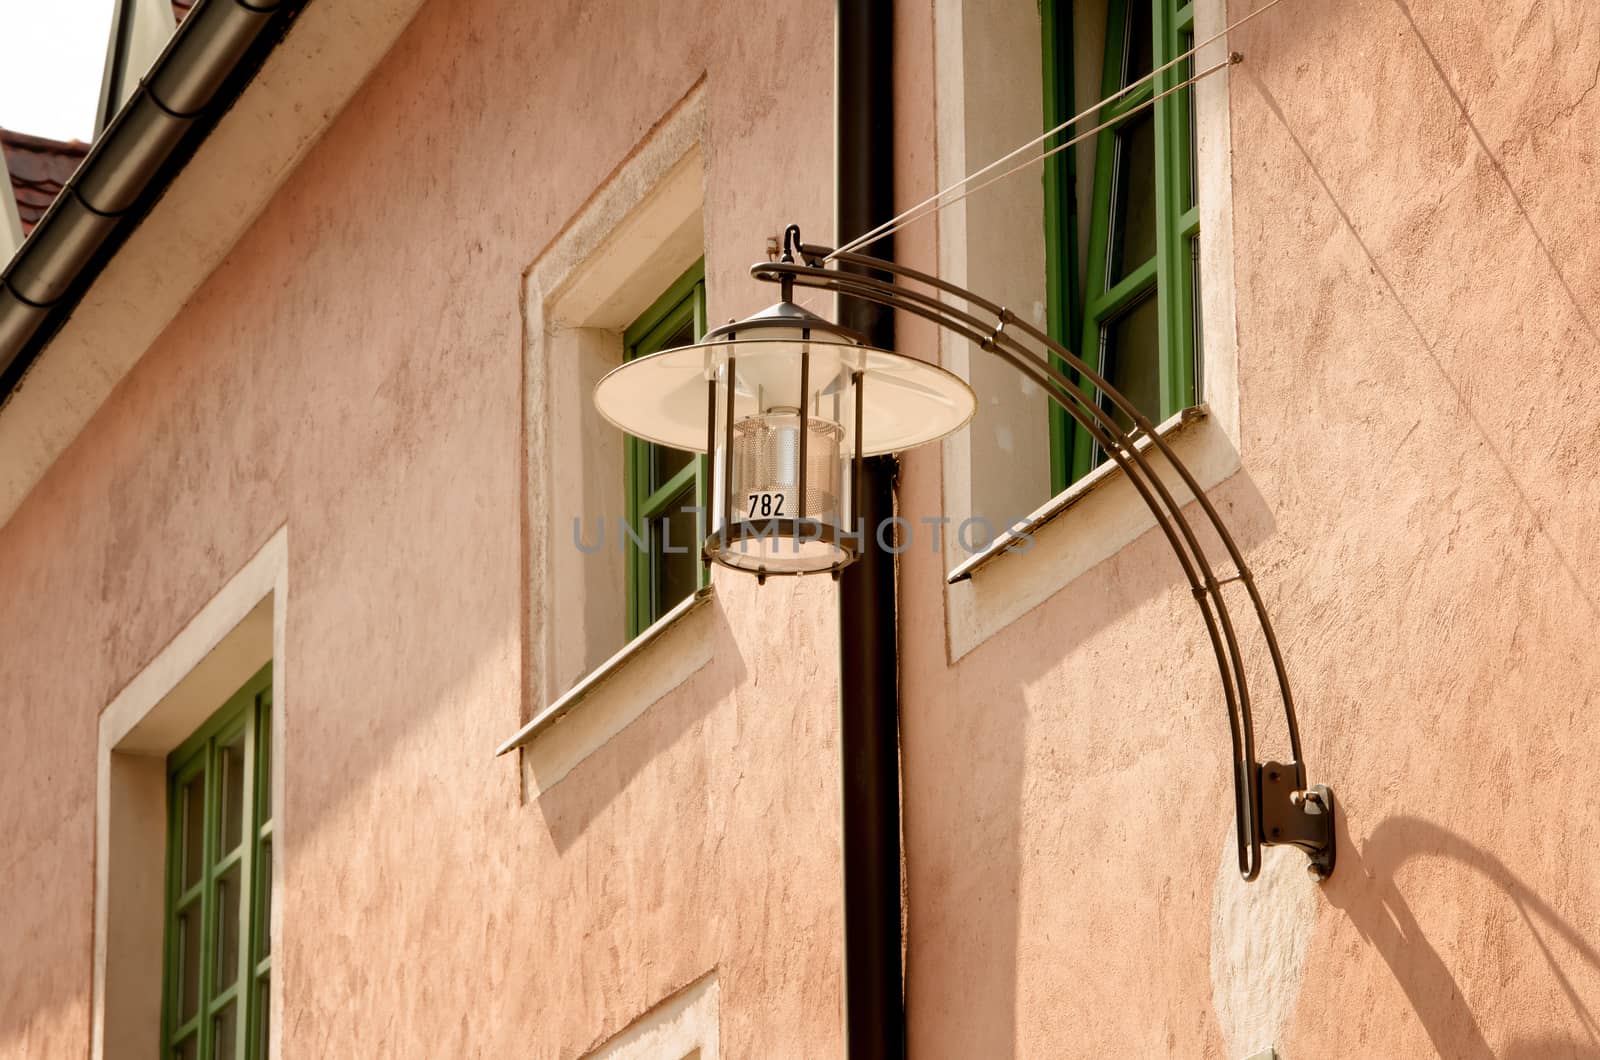 Street lamp on the pink house with green windows.